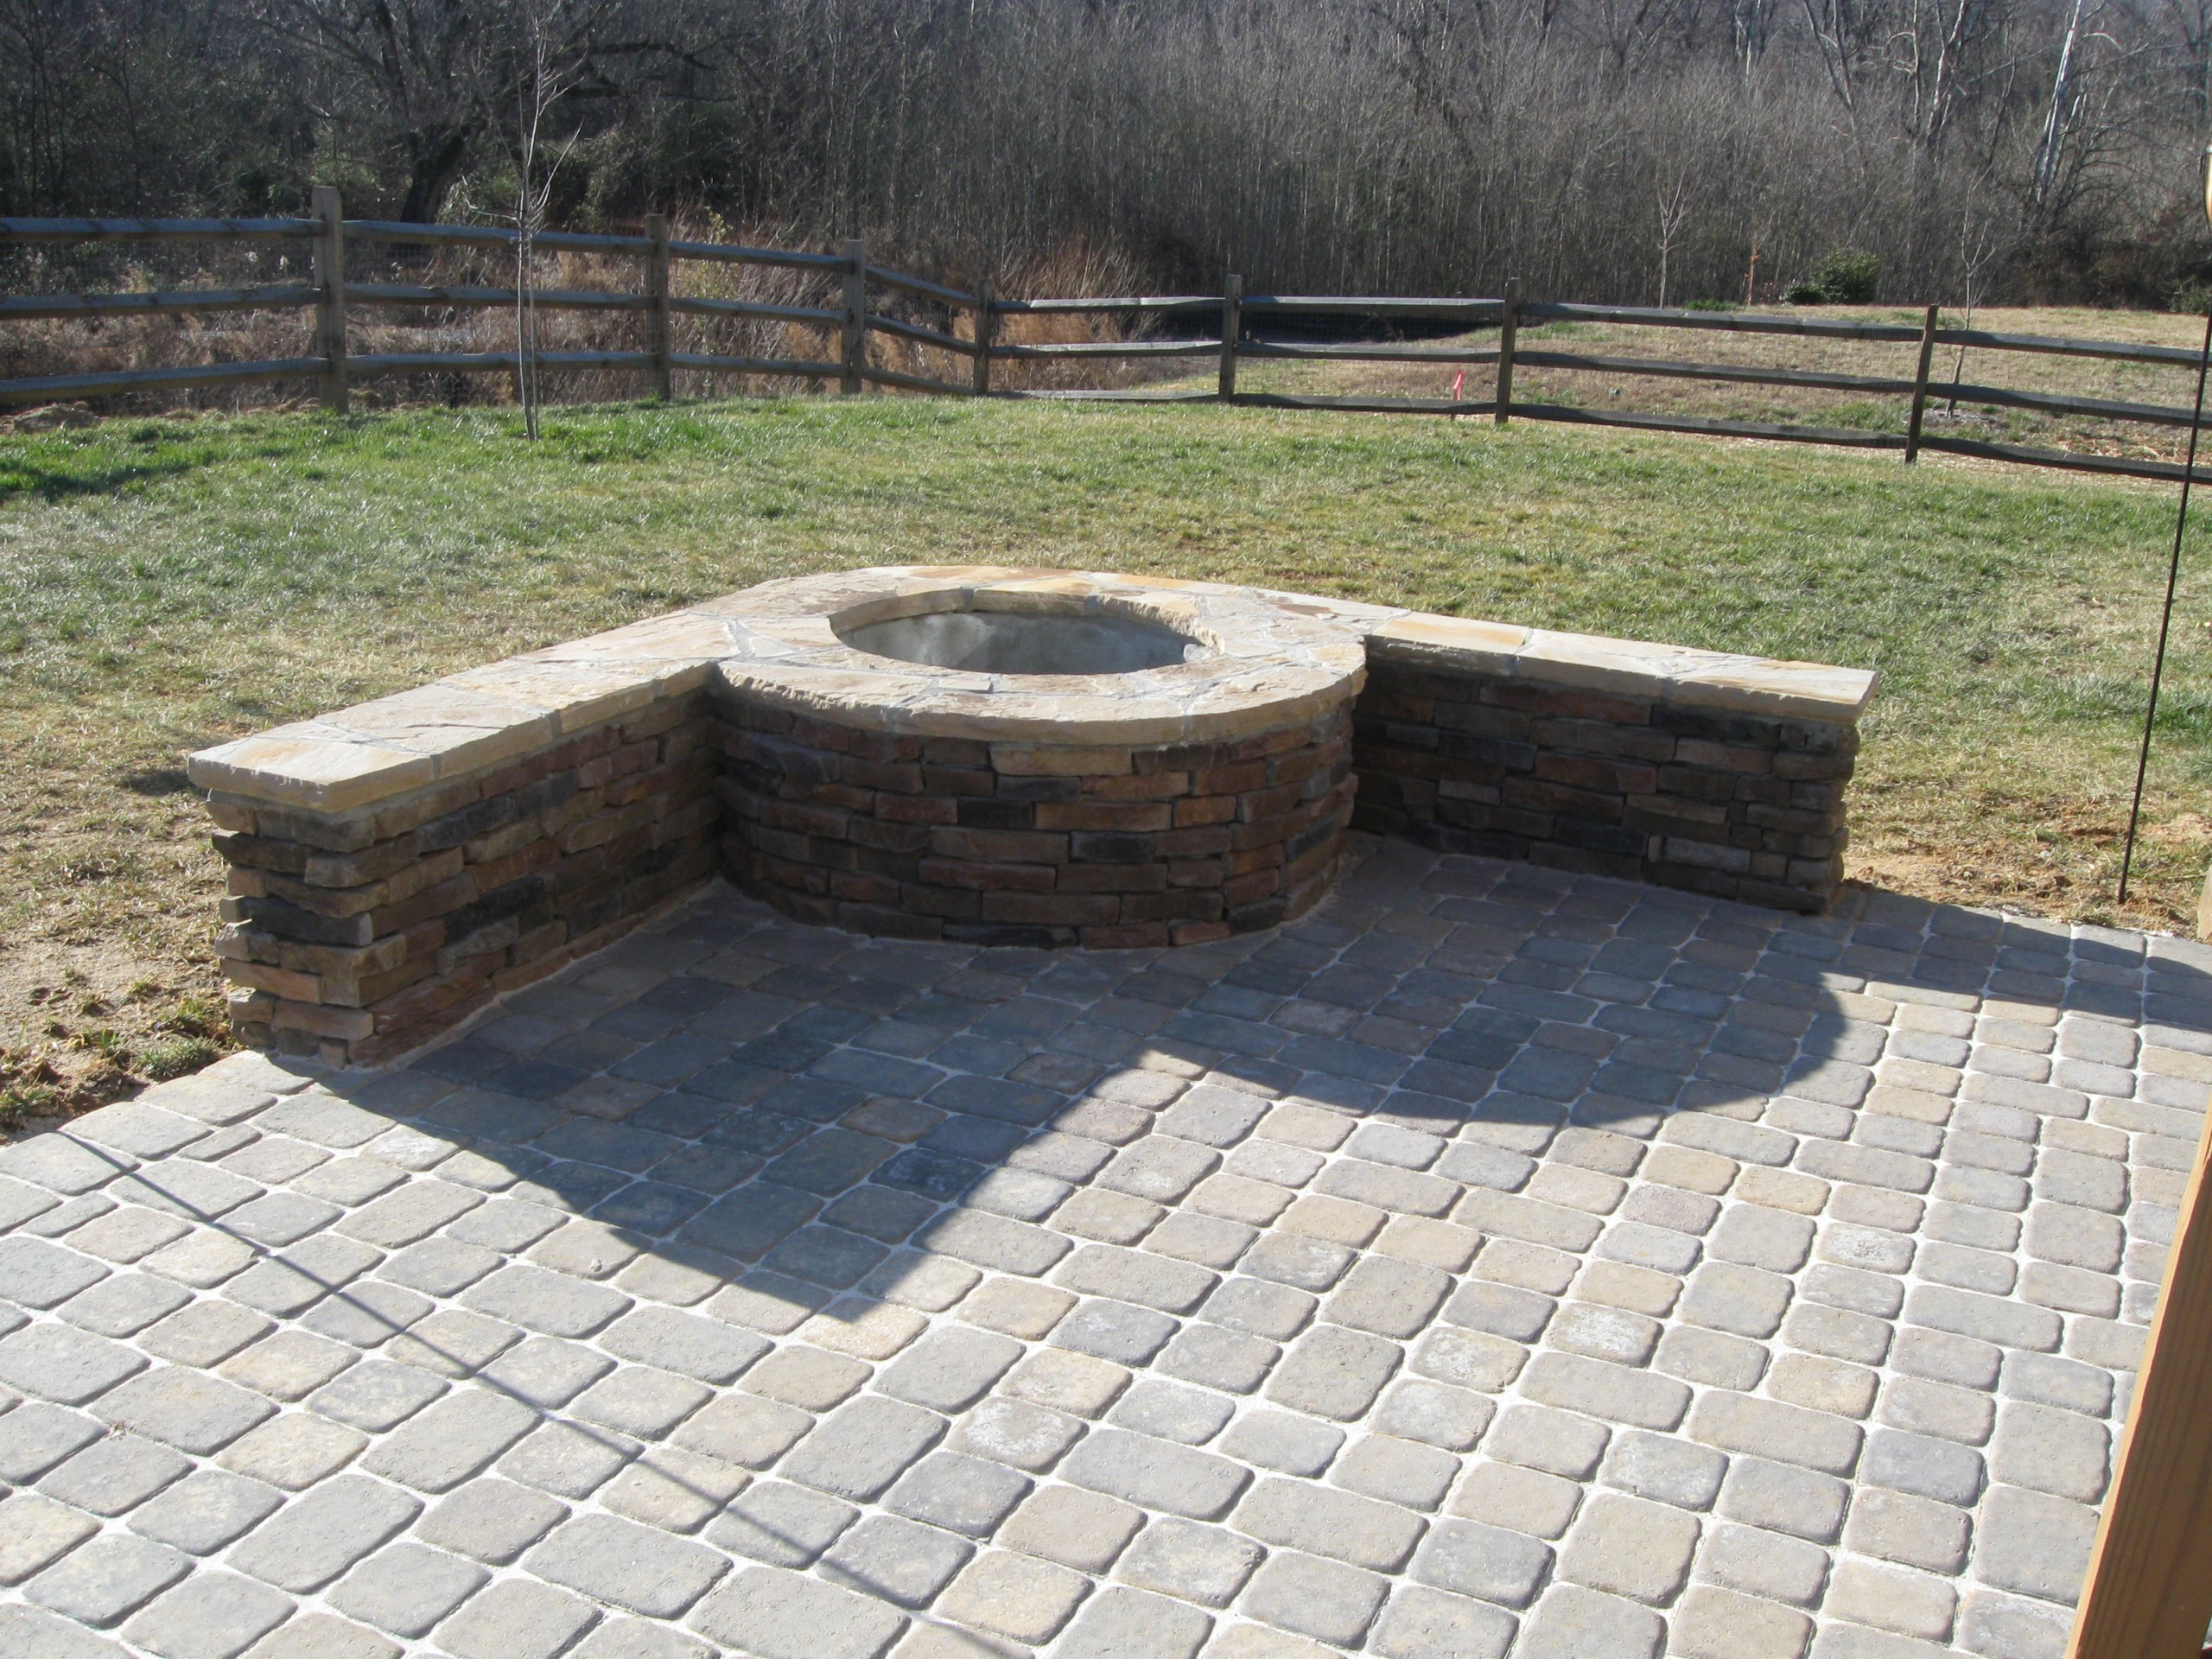 Paver Patio With Fire Pit
 How to build a stone outdoor patio